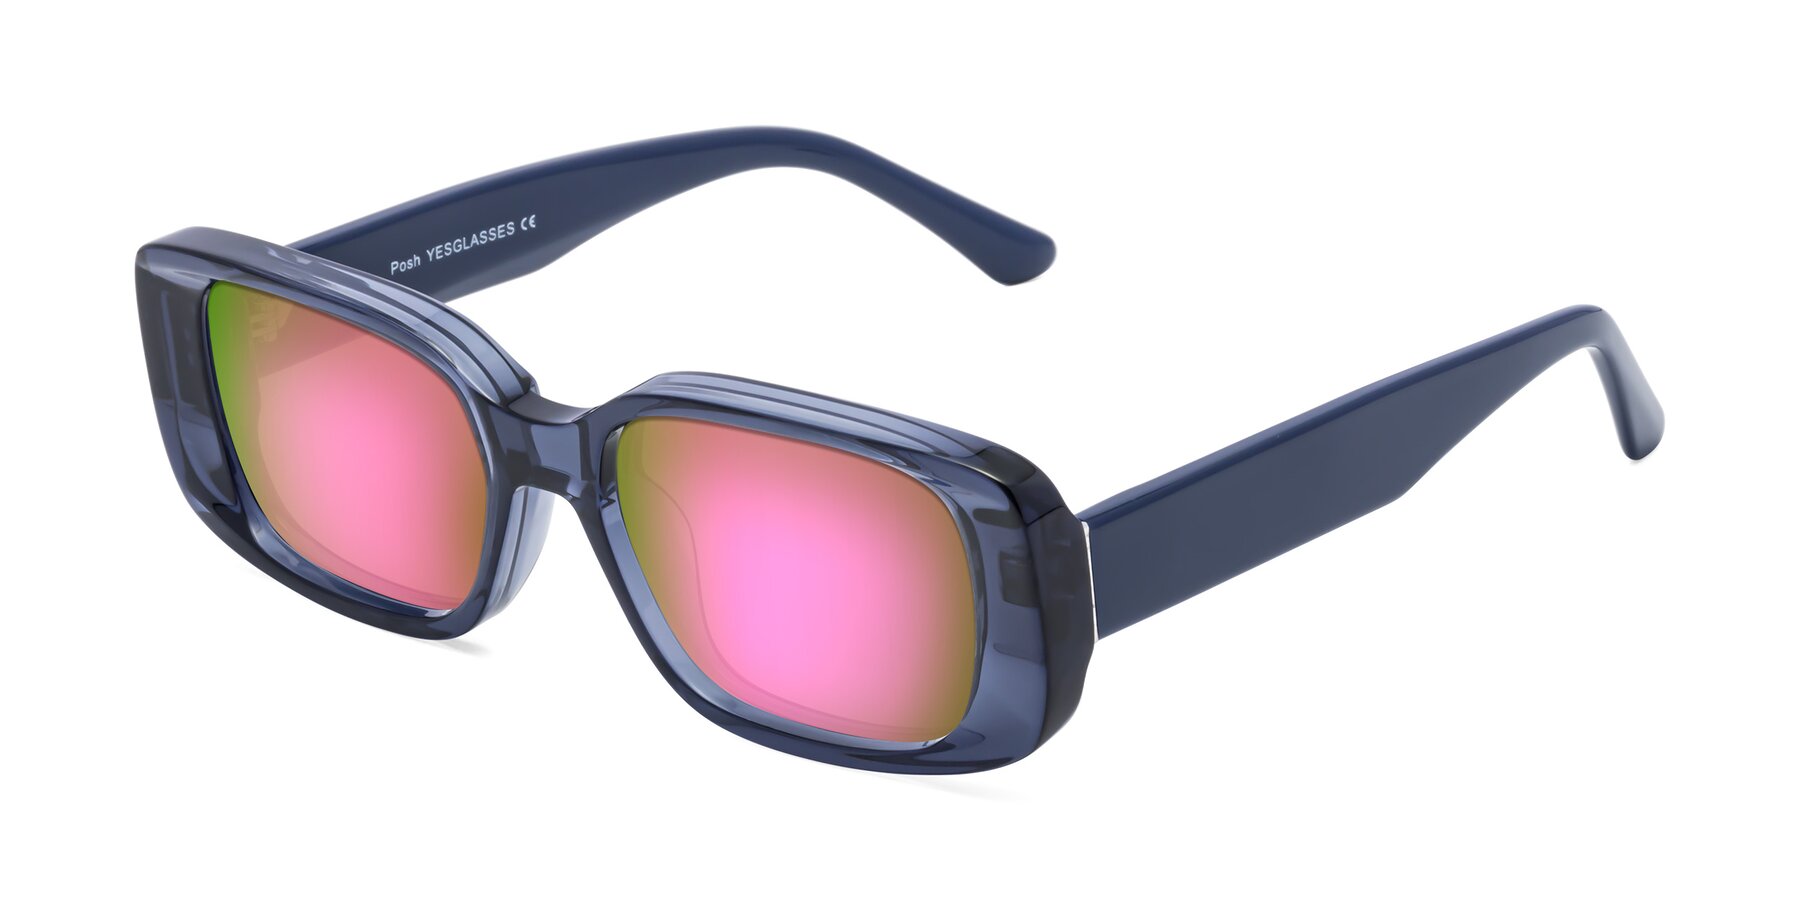 Angle of Posh in Translucent Blue with Pink Mirrored Lenses